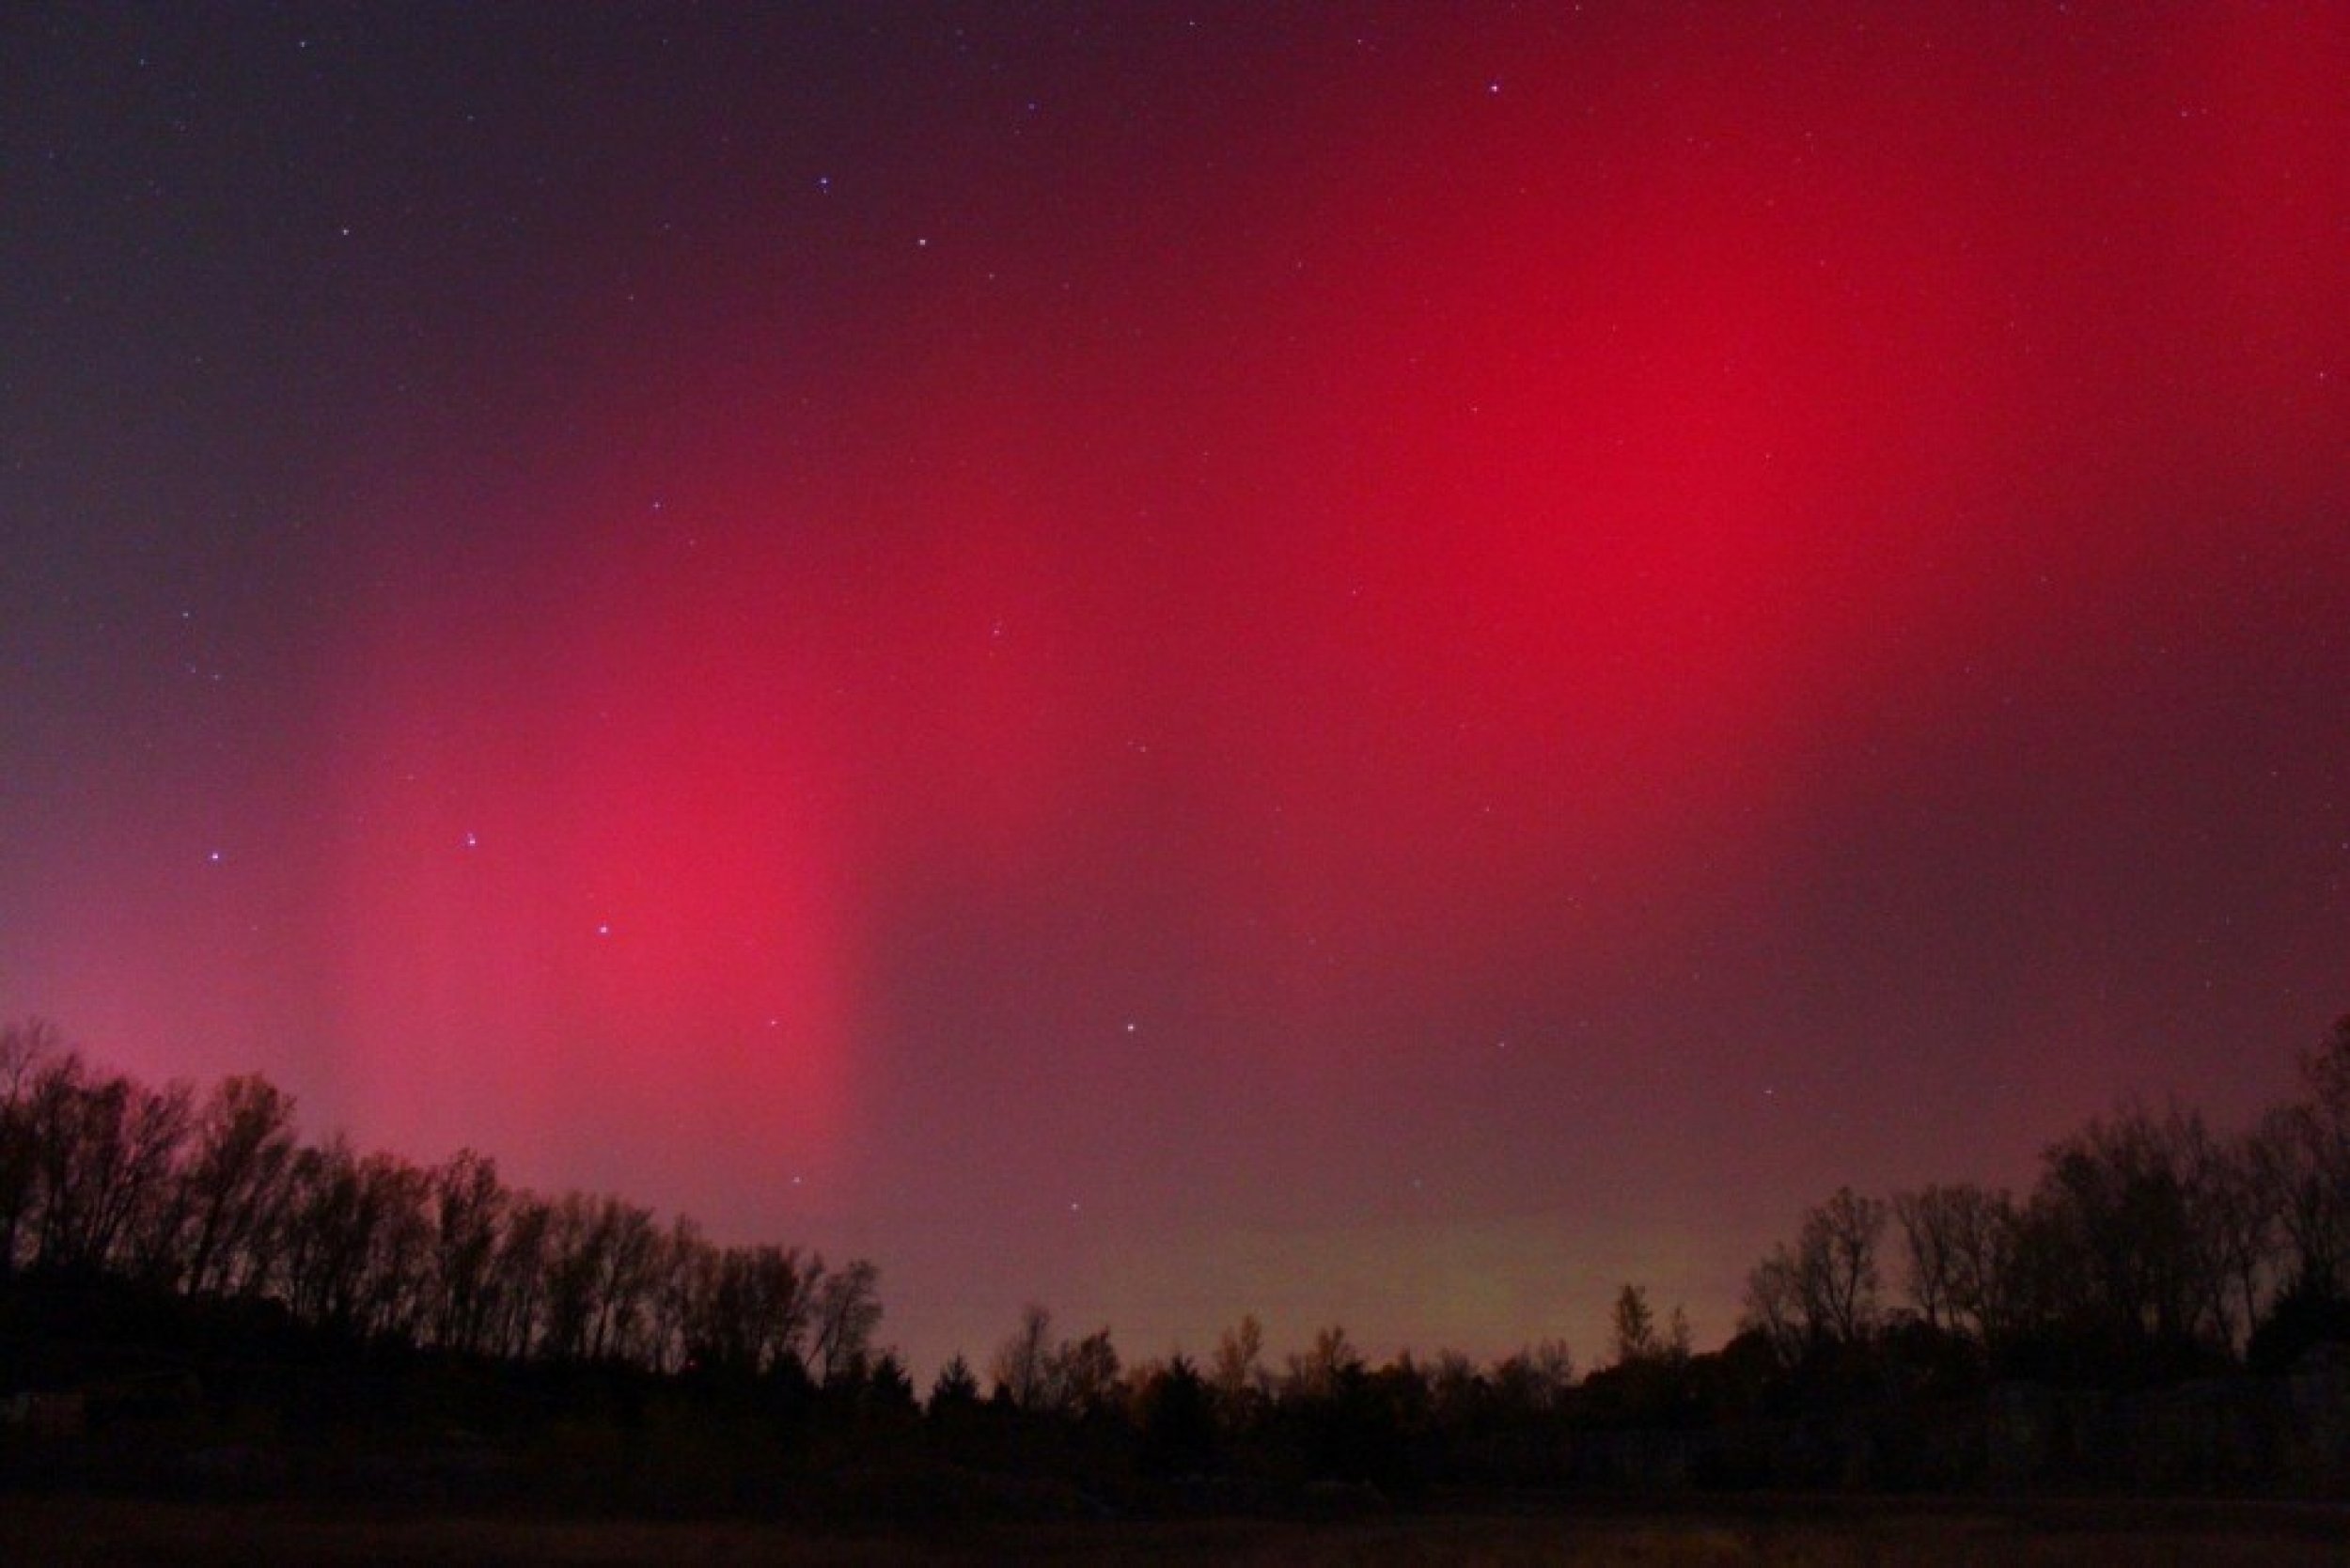 Another view of an all-red aurora captured in Independence, Mo., on October 24, 2011.